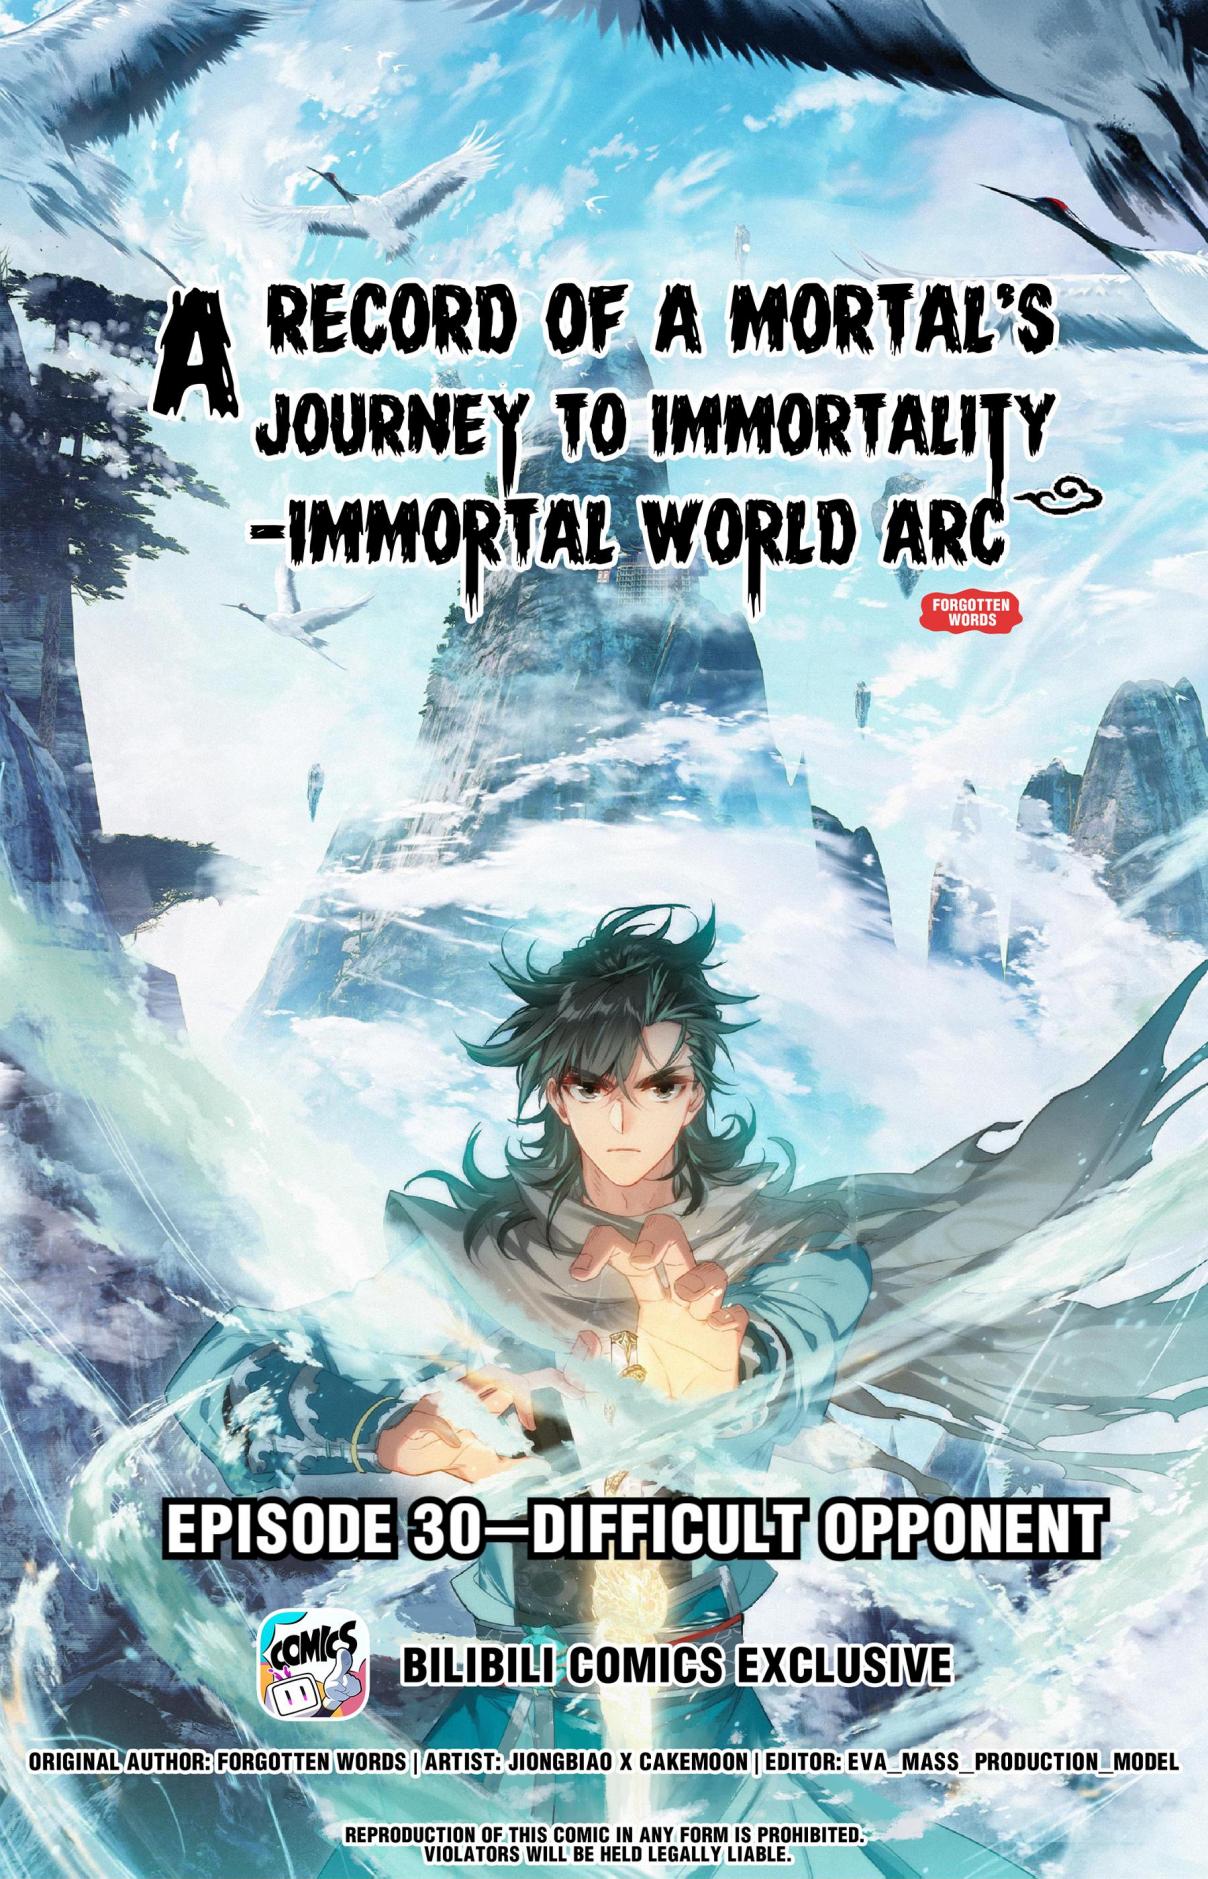 A Record of a Mortal's Journey to Immortality—Immortal World Arc 30 Difficult Opponent